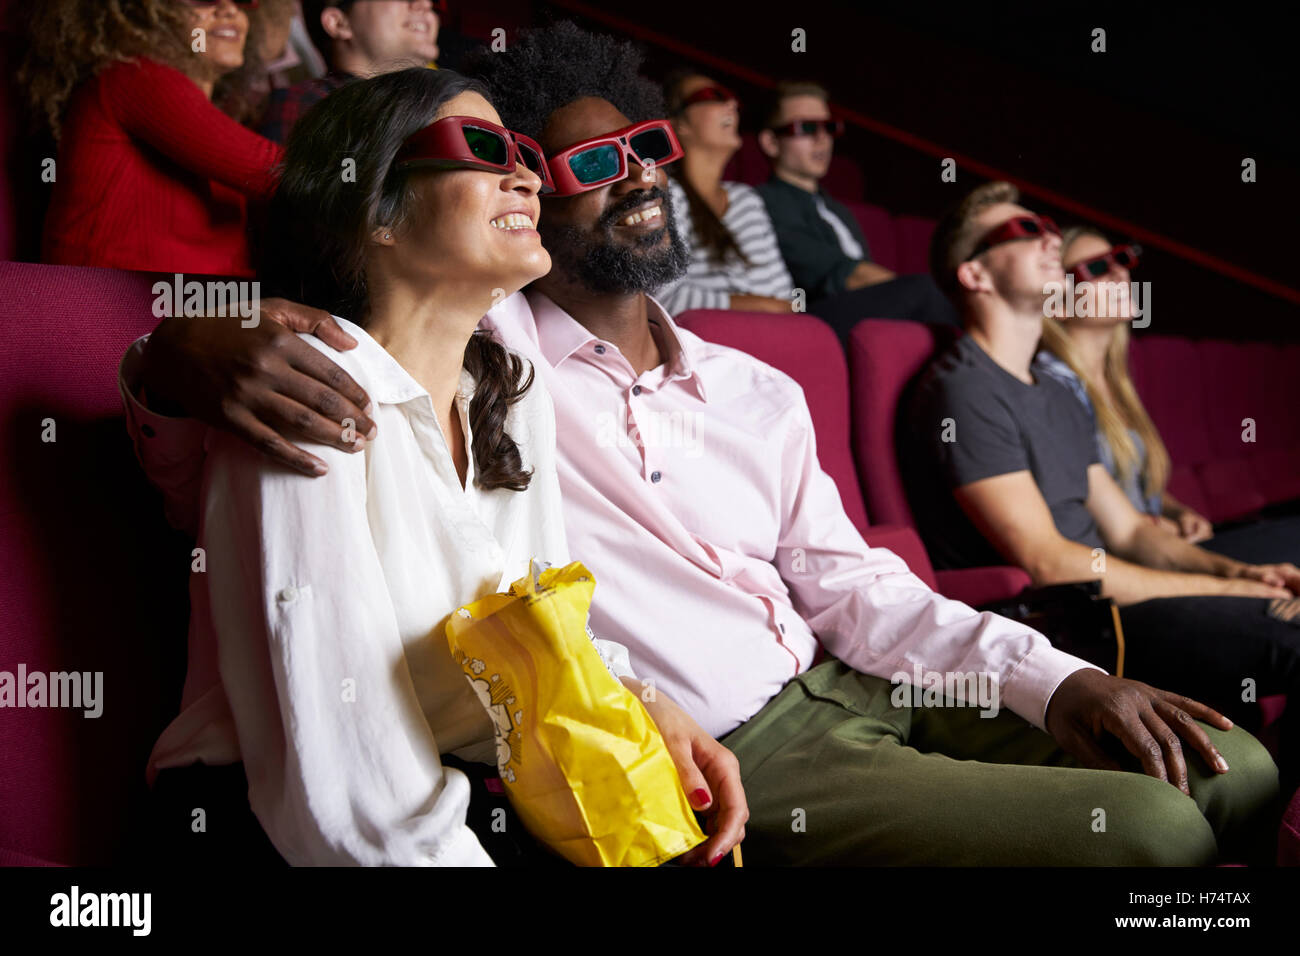 Couple In Cinema Wearing 3D Glasses Watching Comedy Film Stock Photo